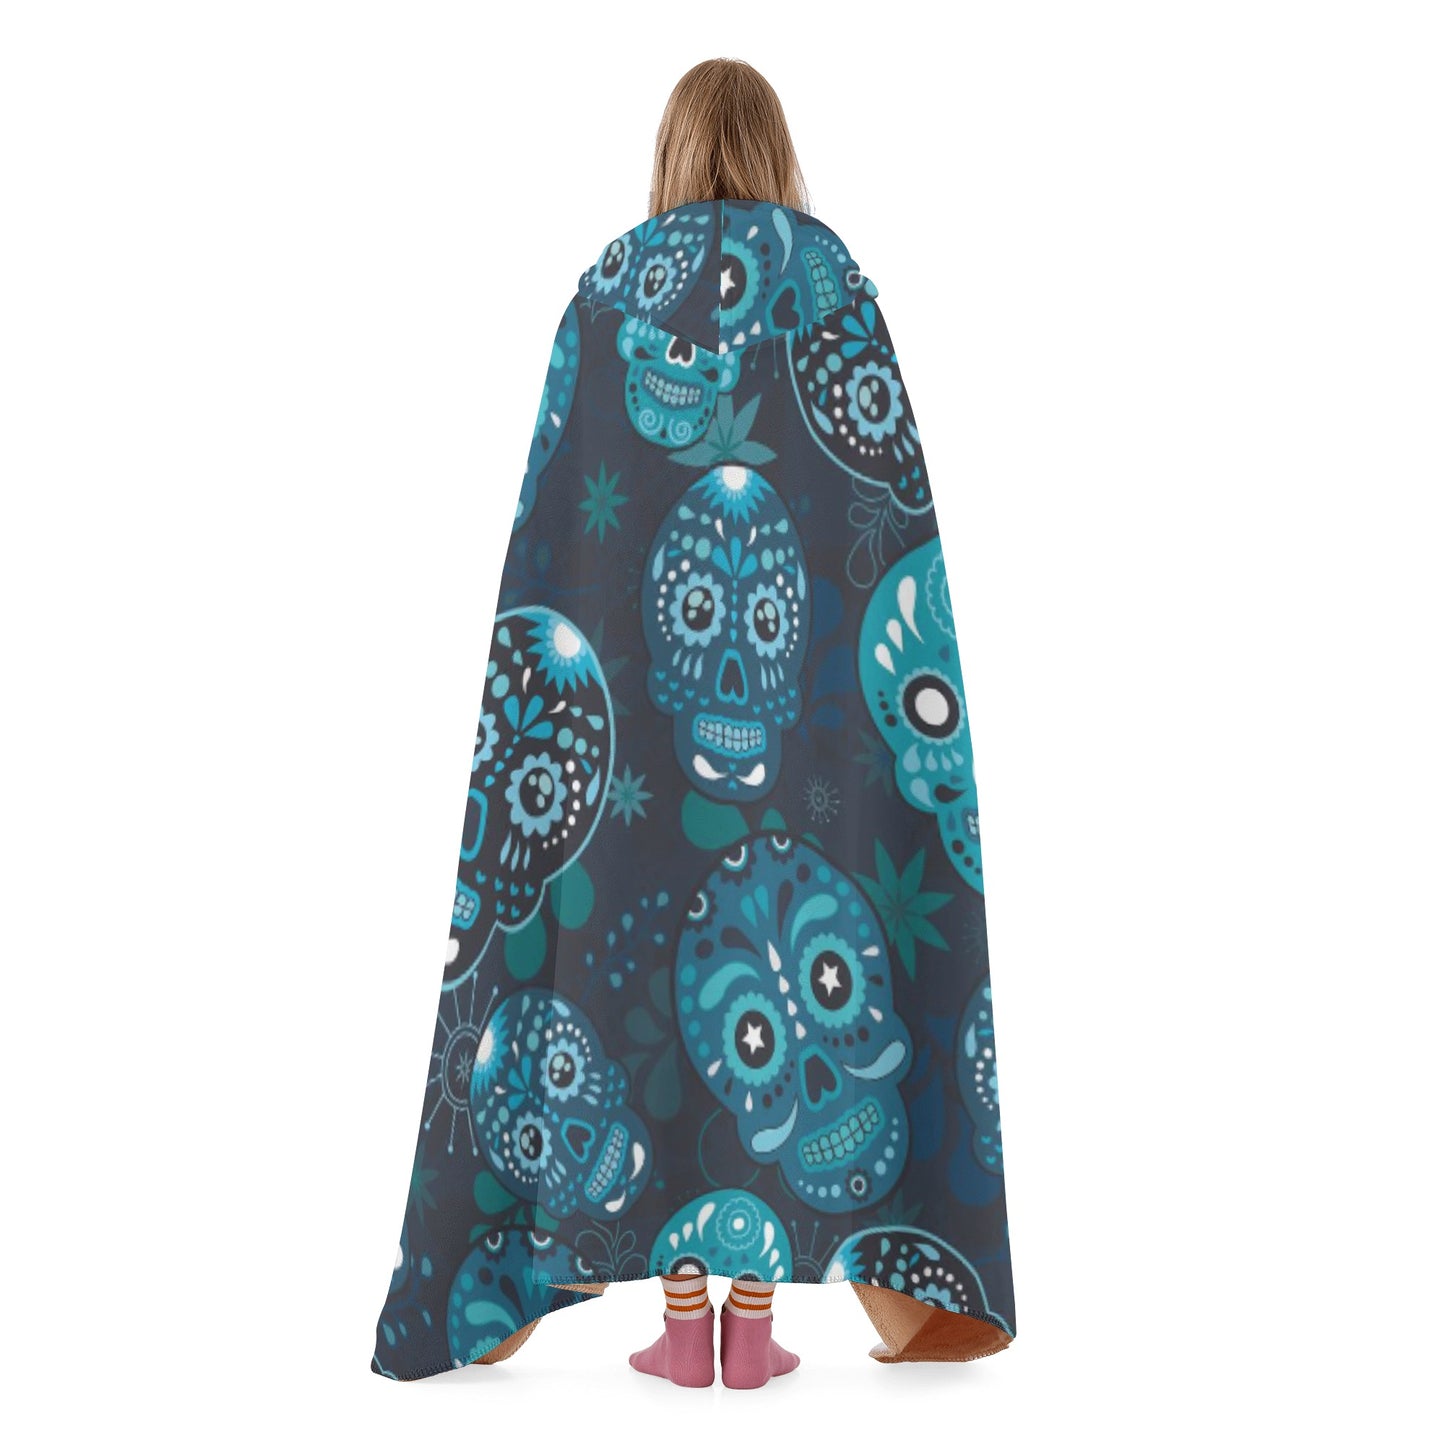 Day of the dead pattern candy skulls Hooded Blanket